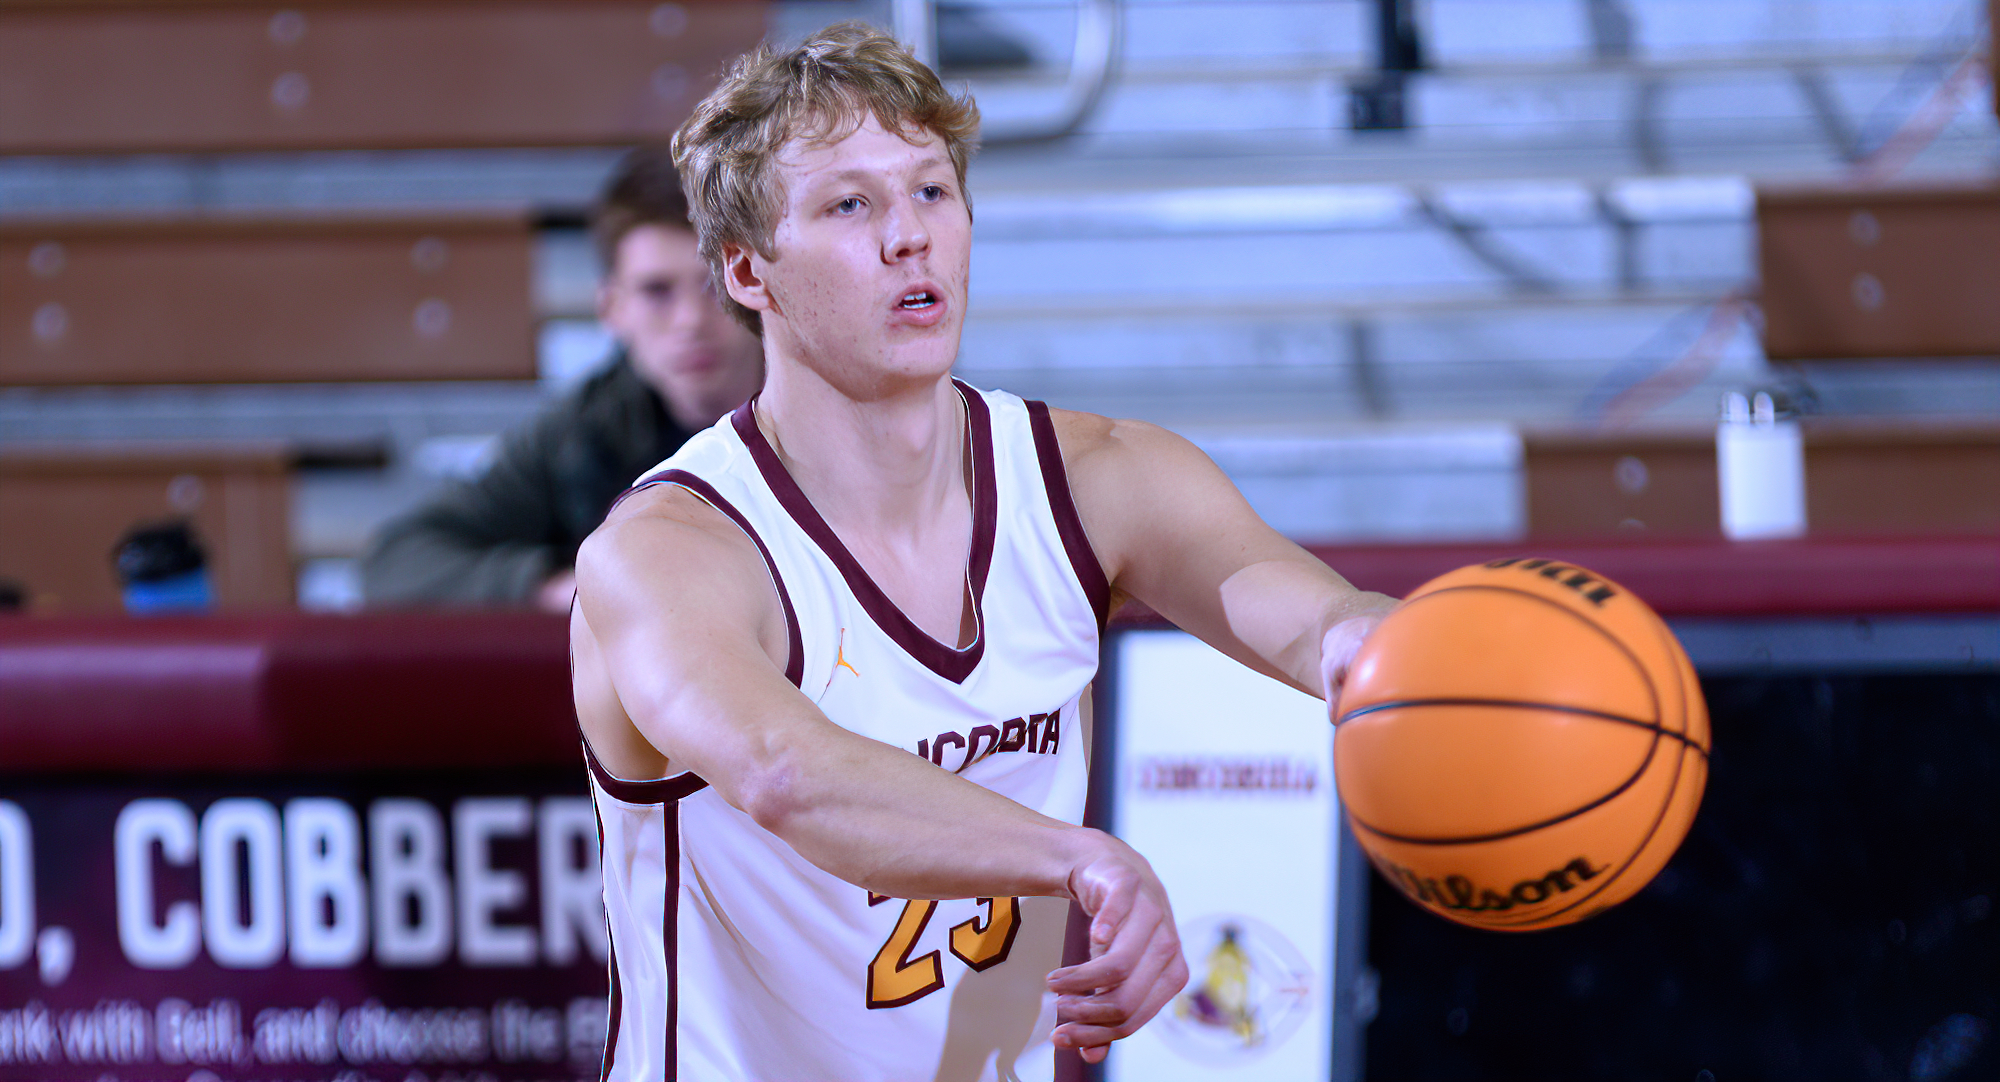 Dylan Inniger scored eight of his team-high 13 points in the second half in the Cobbers' game at Carleton. He also led the team with six rebounds.